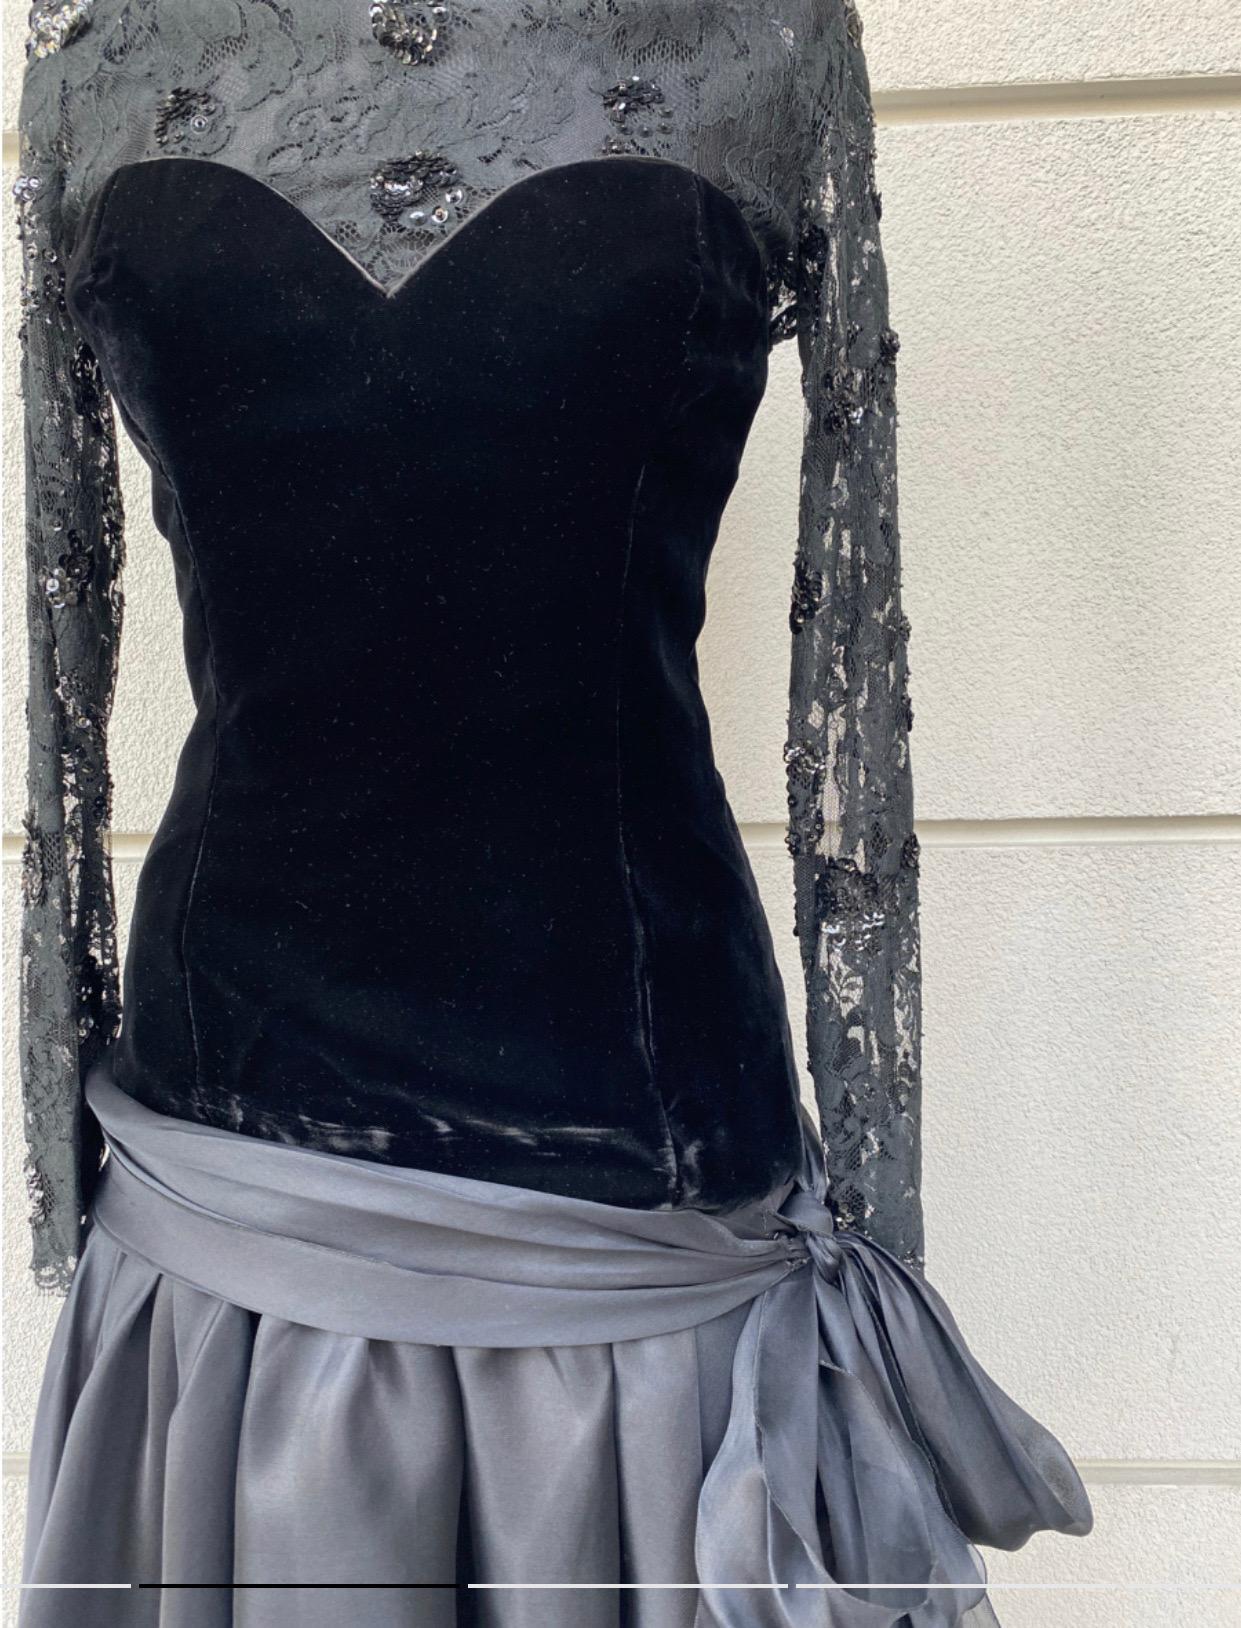 Valentino Night Dress.
in lace, velvet and silk.
Italian size 40.
measurements:
shoulders 40 cm
bust 38 cm
waist 35 cm
length 140 cm
sleeve 60 cm
Excellent general condition, shows minimal signs of use